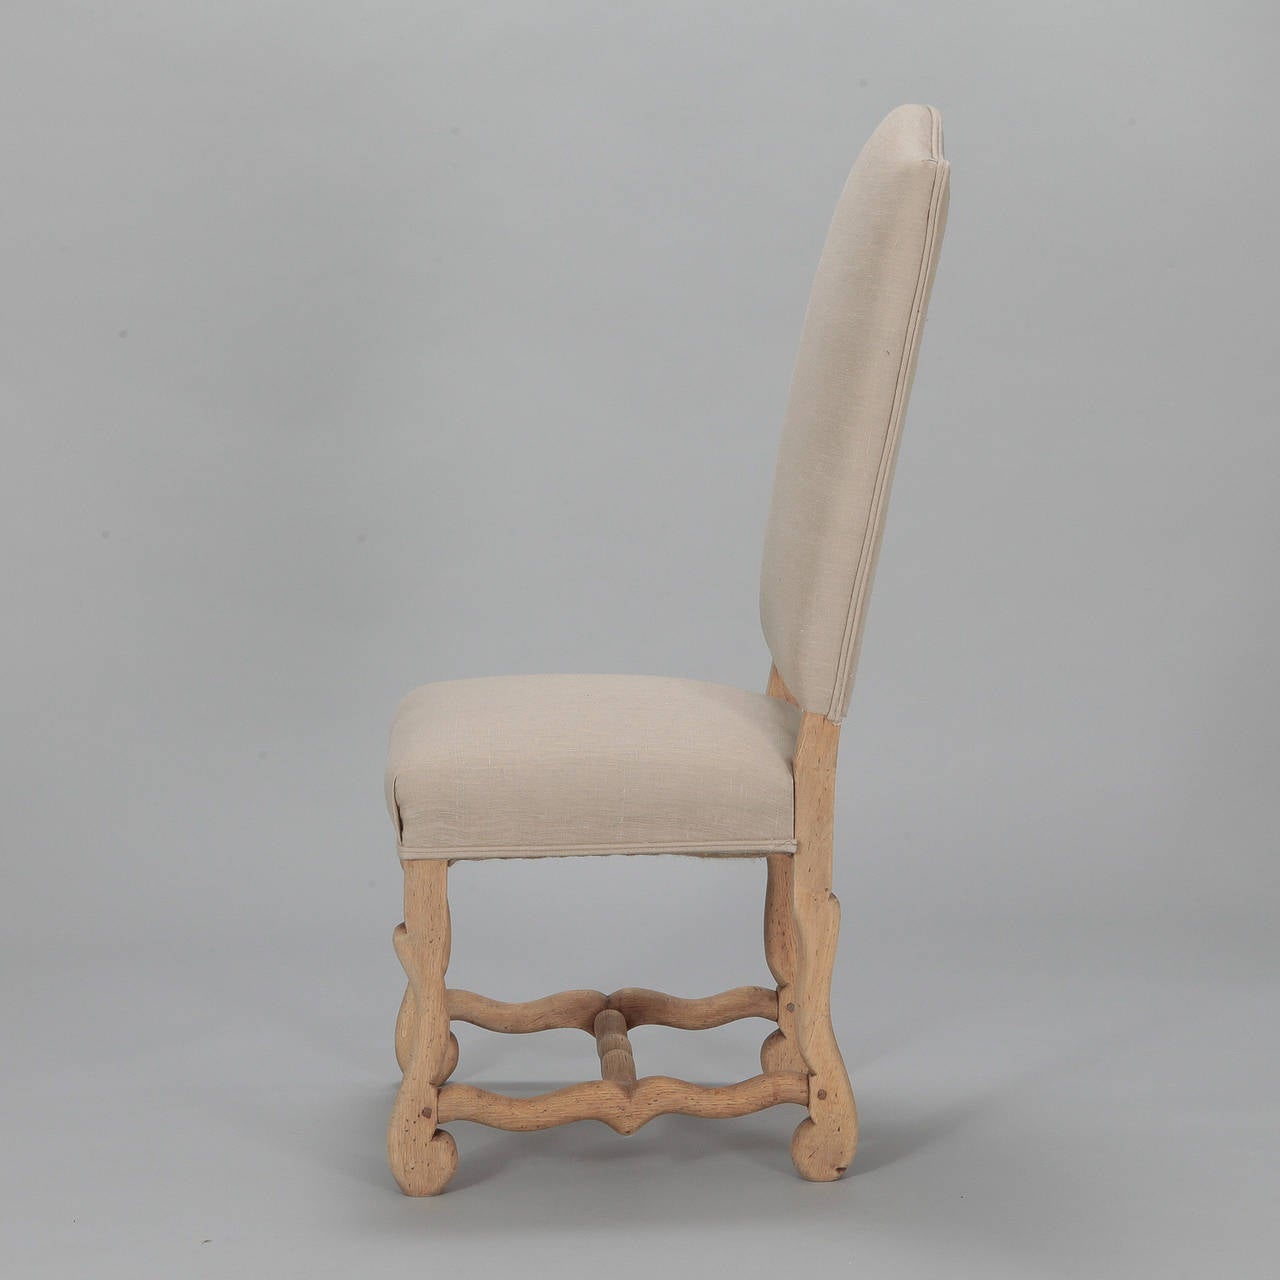 Circa 1920s set of eight Os De Mouton side chairs with bleached oak frames and new, natural color linen upholstery. Seats are 19” high and 16.5” deep. Sold and priced as a set.